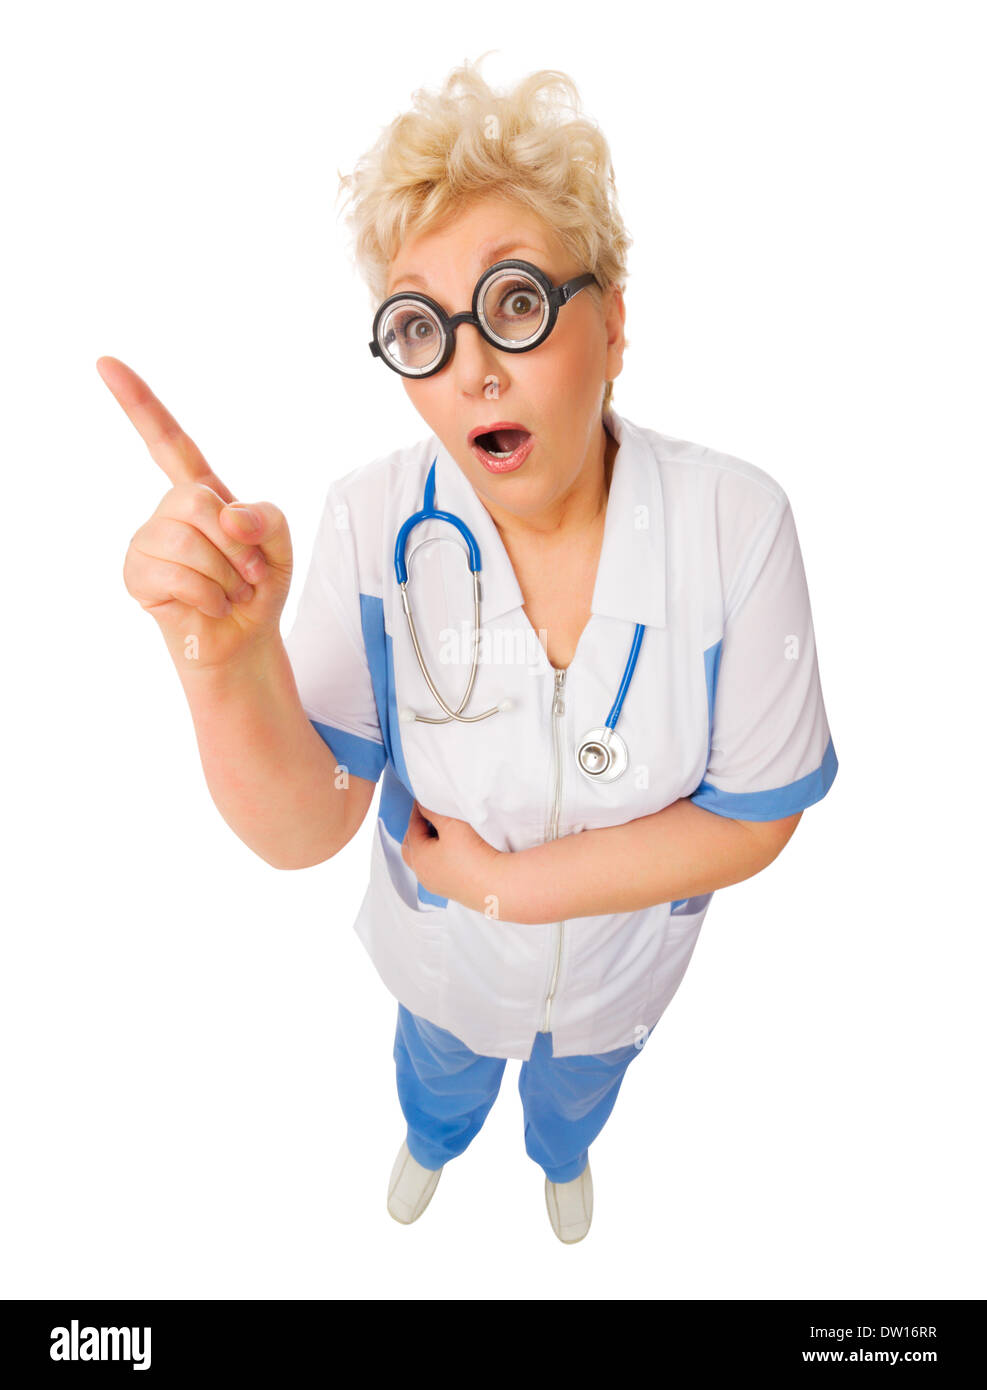 Funny mature doctor in nerd glasses isolated Stock Photo